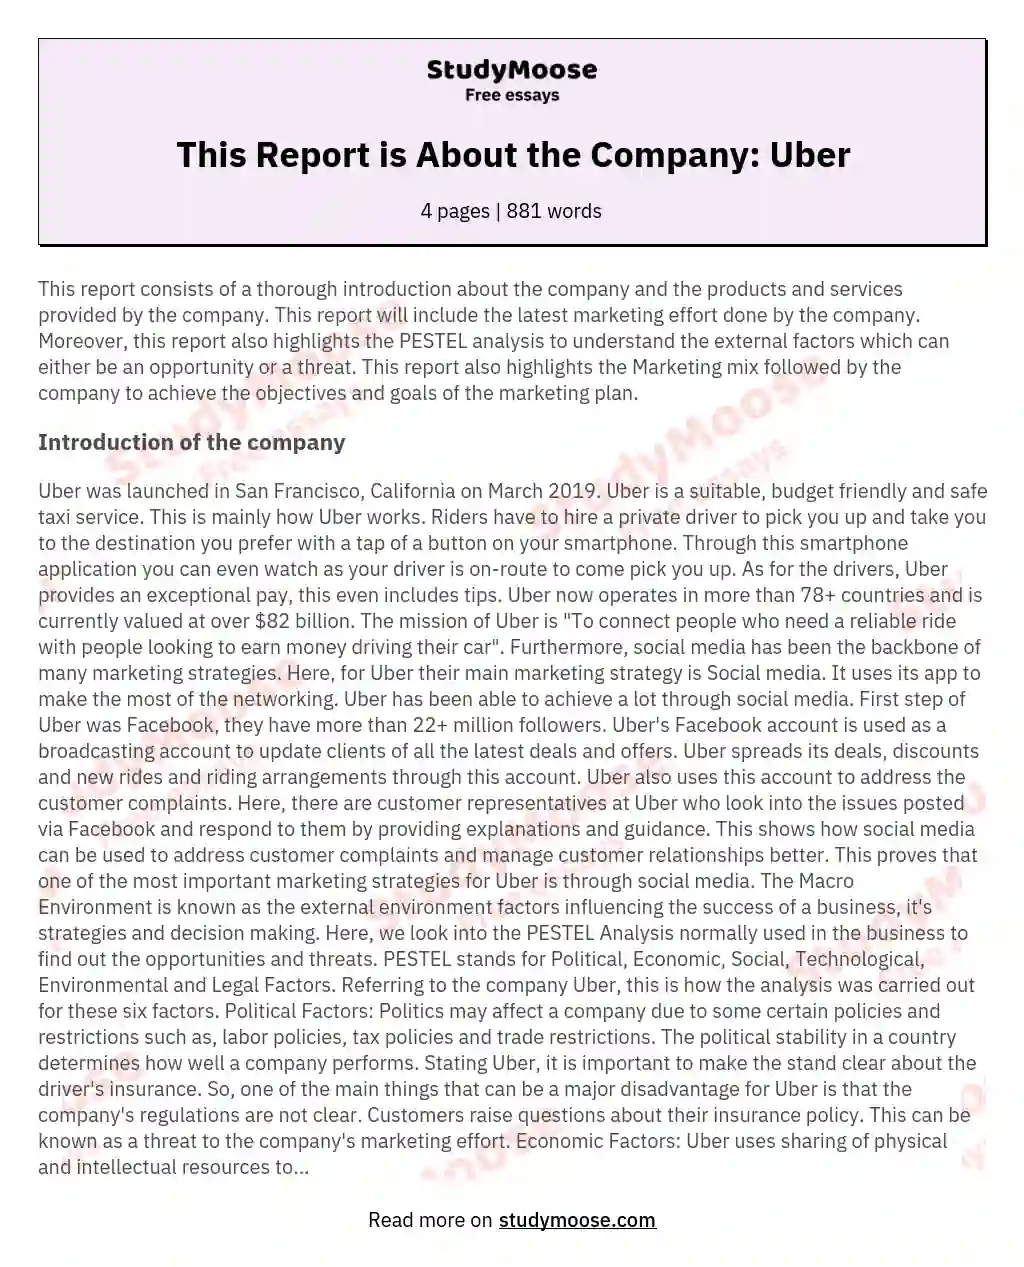 This Report is About the Company: Uber essay